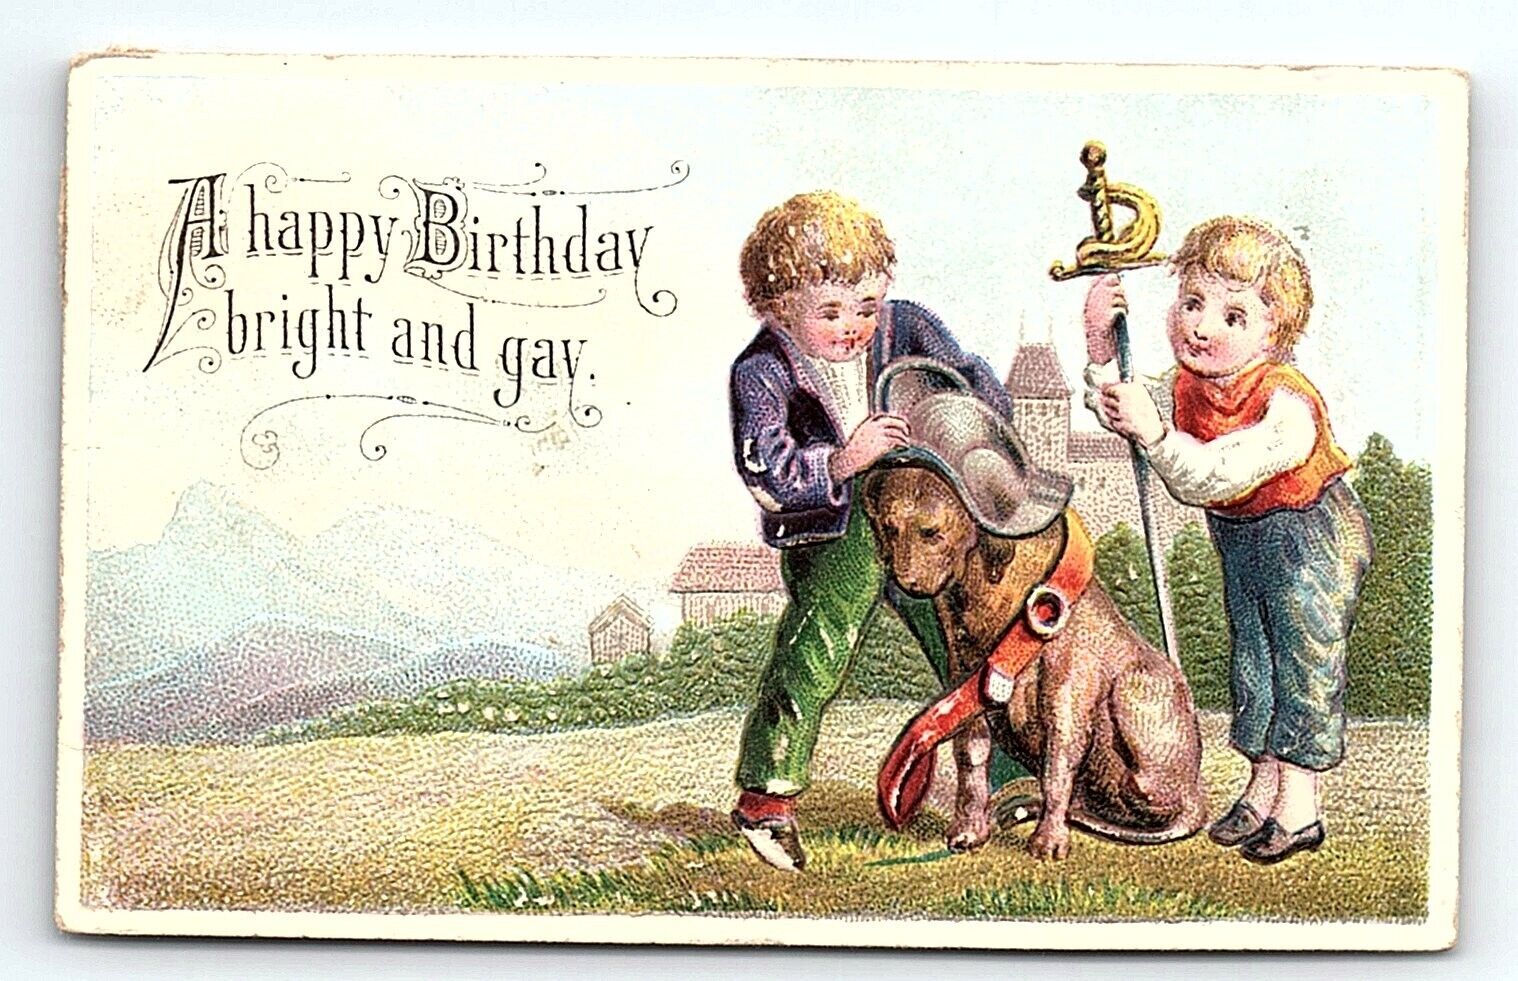 c1880 EMBOSSED BIRTHDAY BOYS DRESSING DOG AS A KNIGHT IN ARMOR TRADE? CARD Z1211